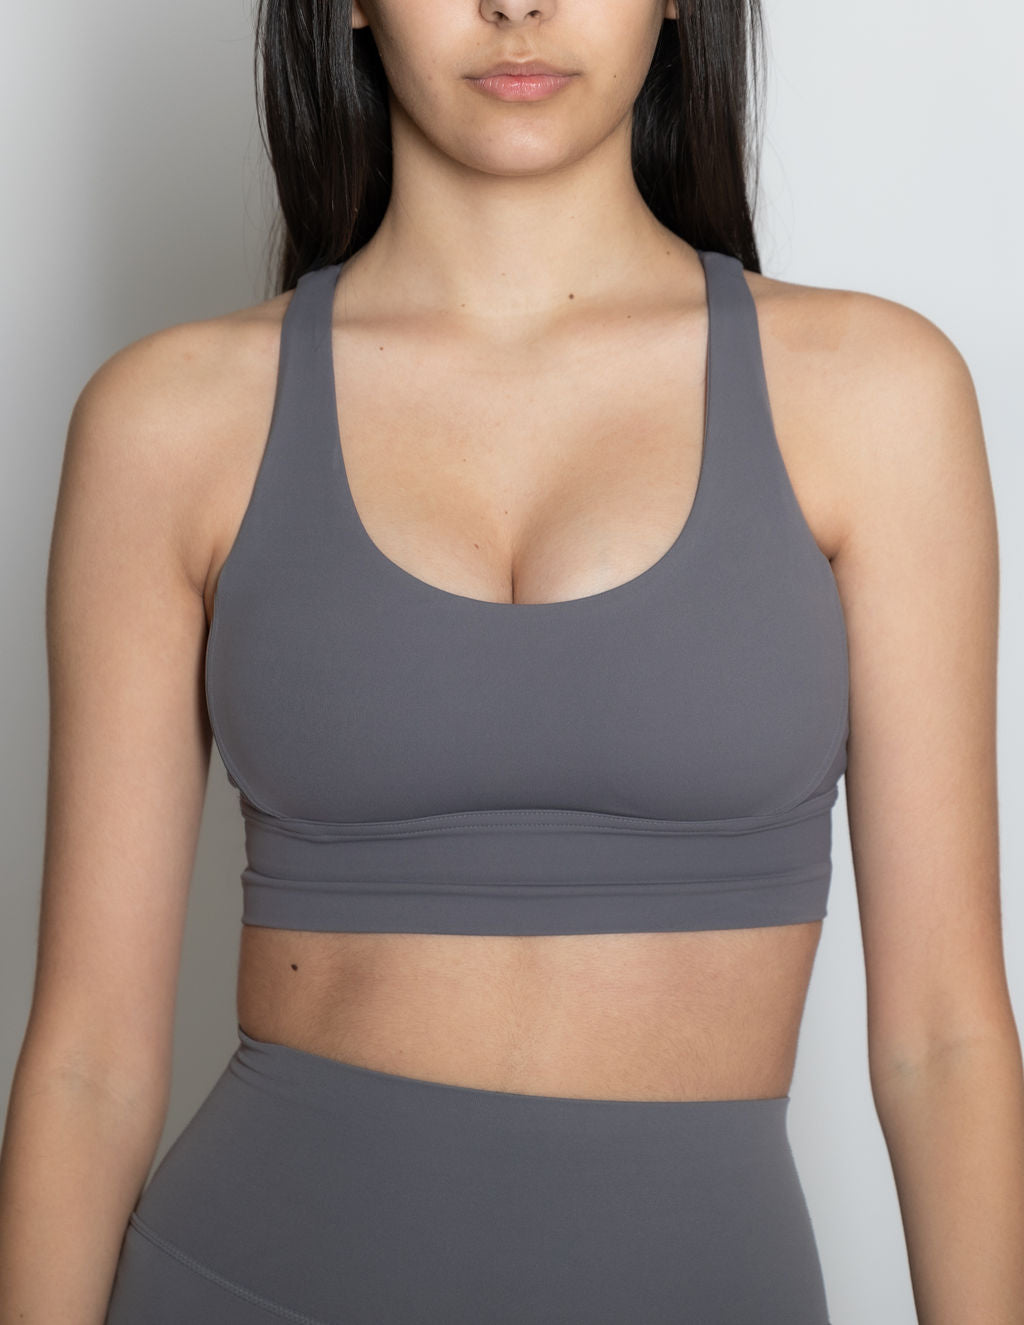 FIGS Performance 300 sports bra. Size XSmall Color - Grey Gray